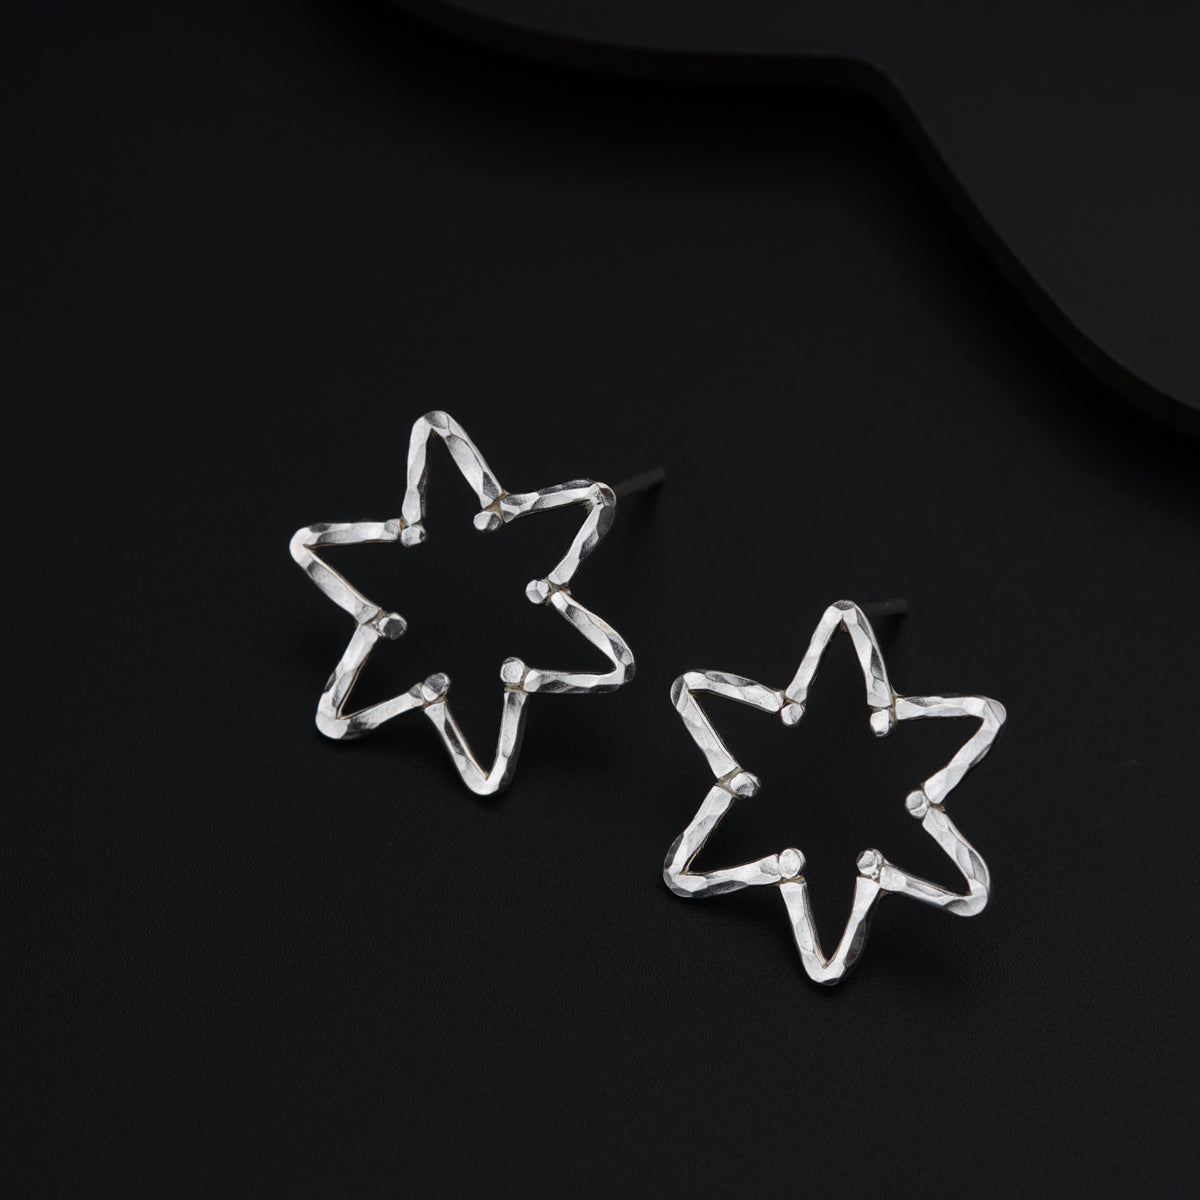 a pair of star shaped earrings sitting on top of a black surface